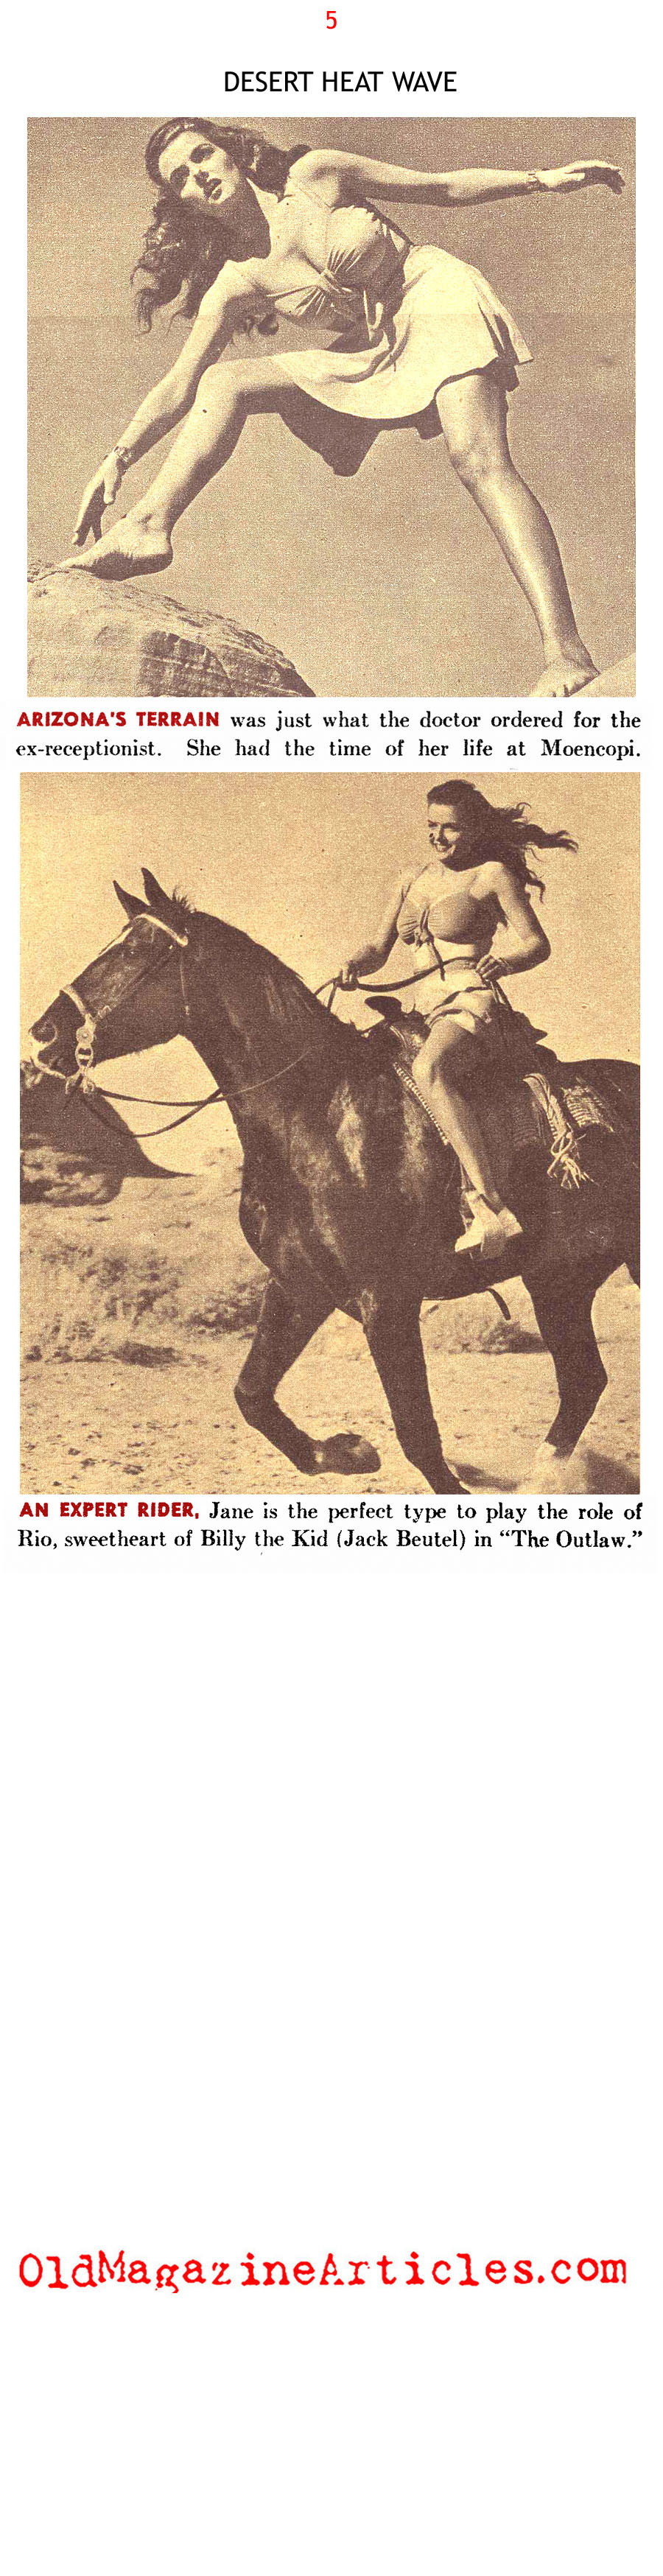 The Star of THE OUTLAW (Pic Magazine, 1941)